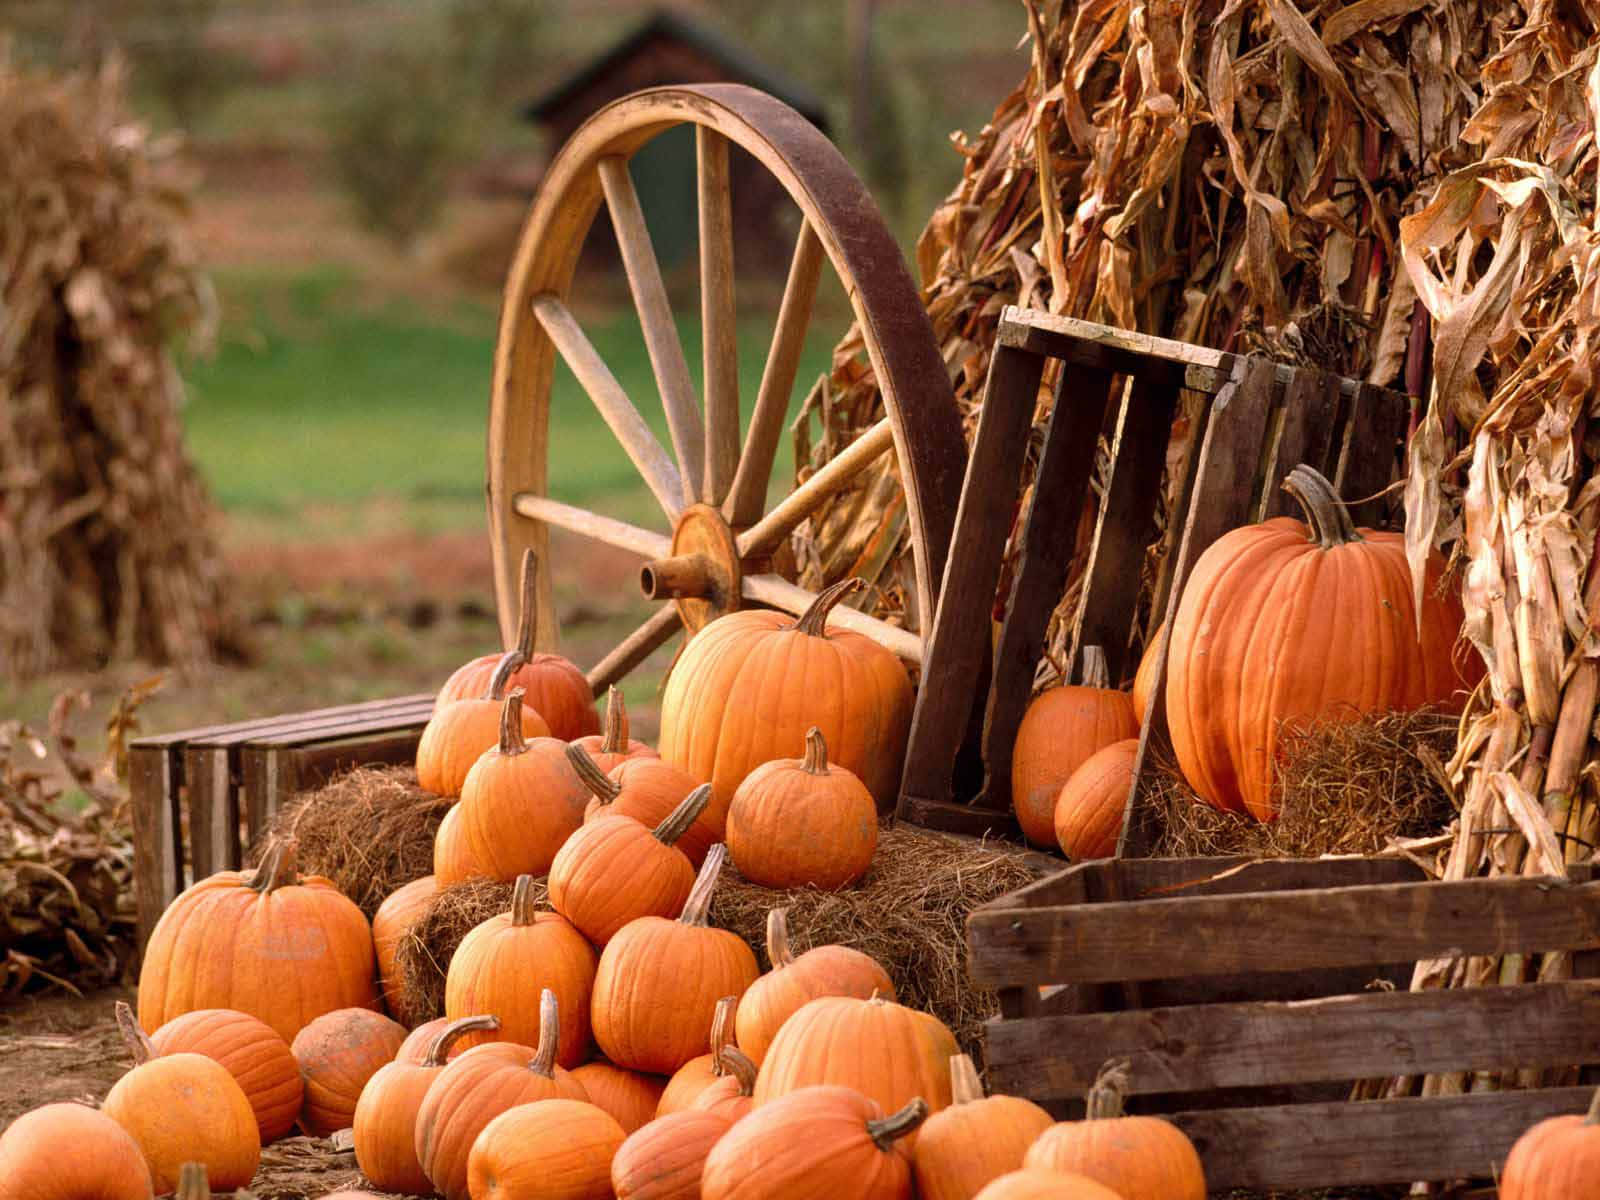 "Autumn vibes with this ripe pumpkin against a rustic background."